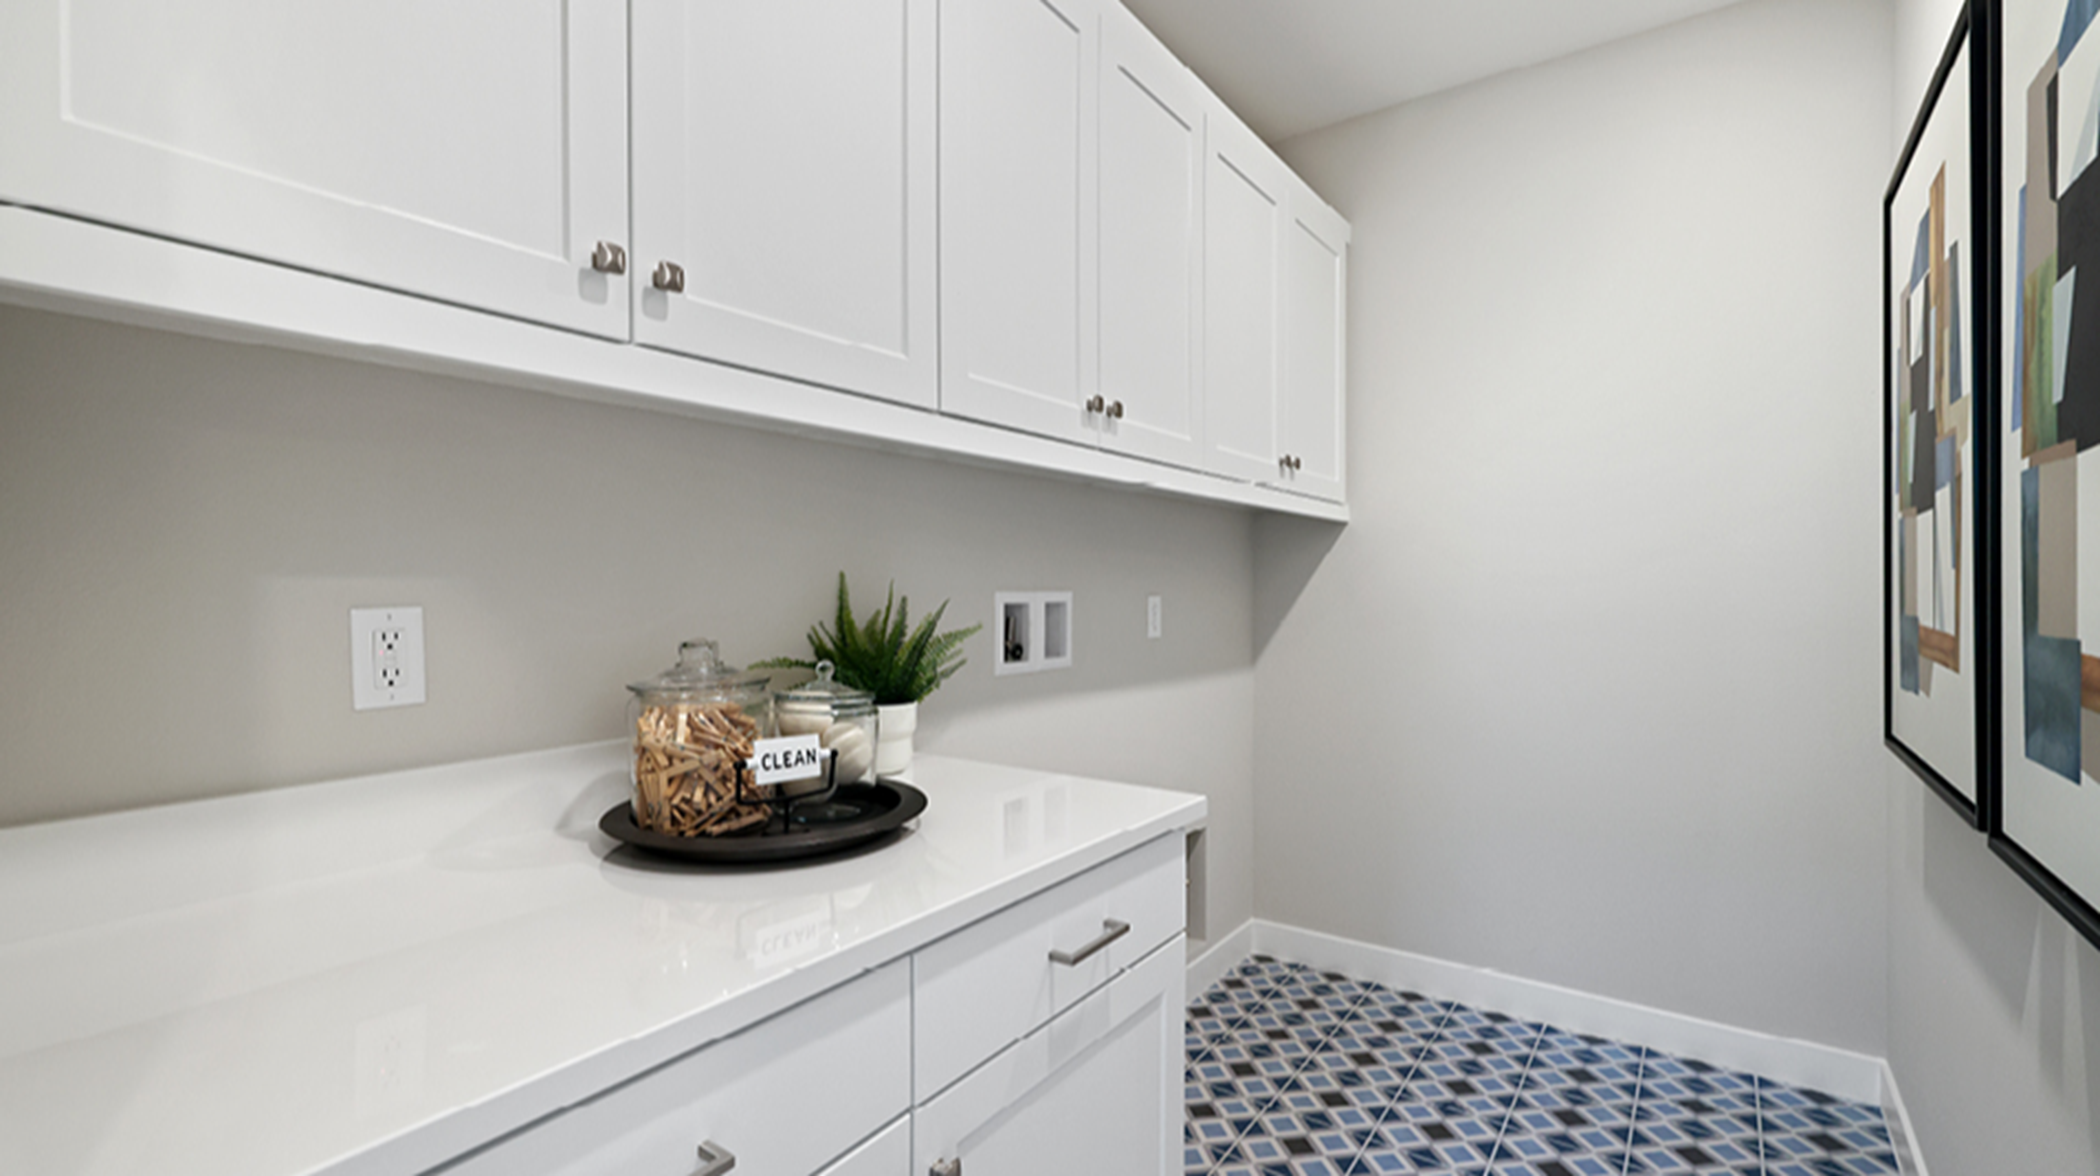 Cabinets and countertops in the laundry room